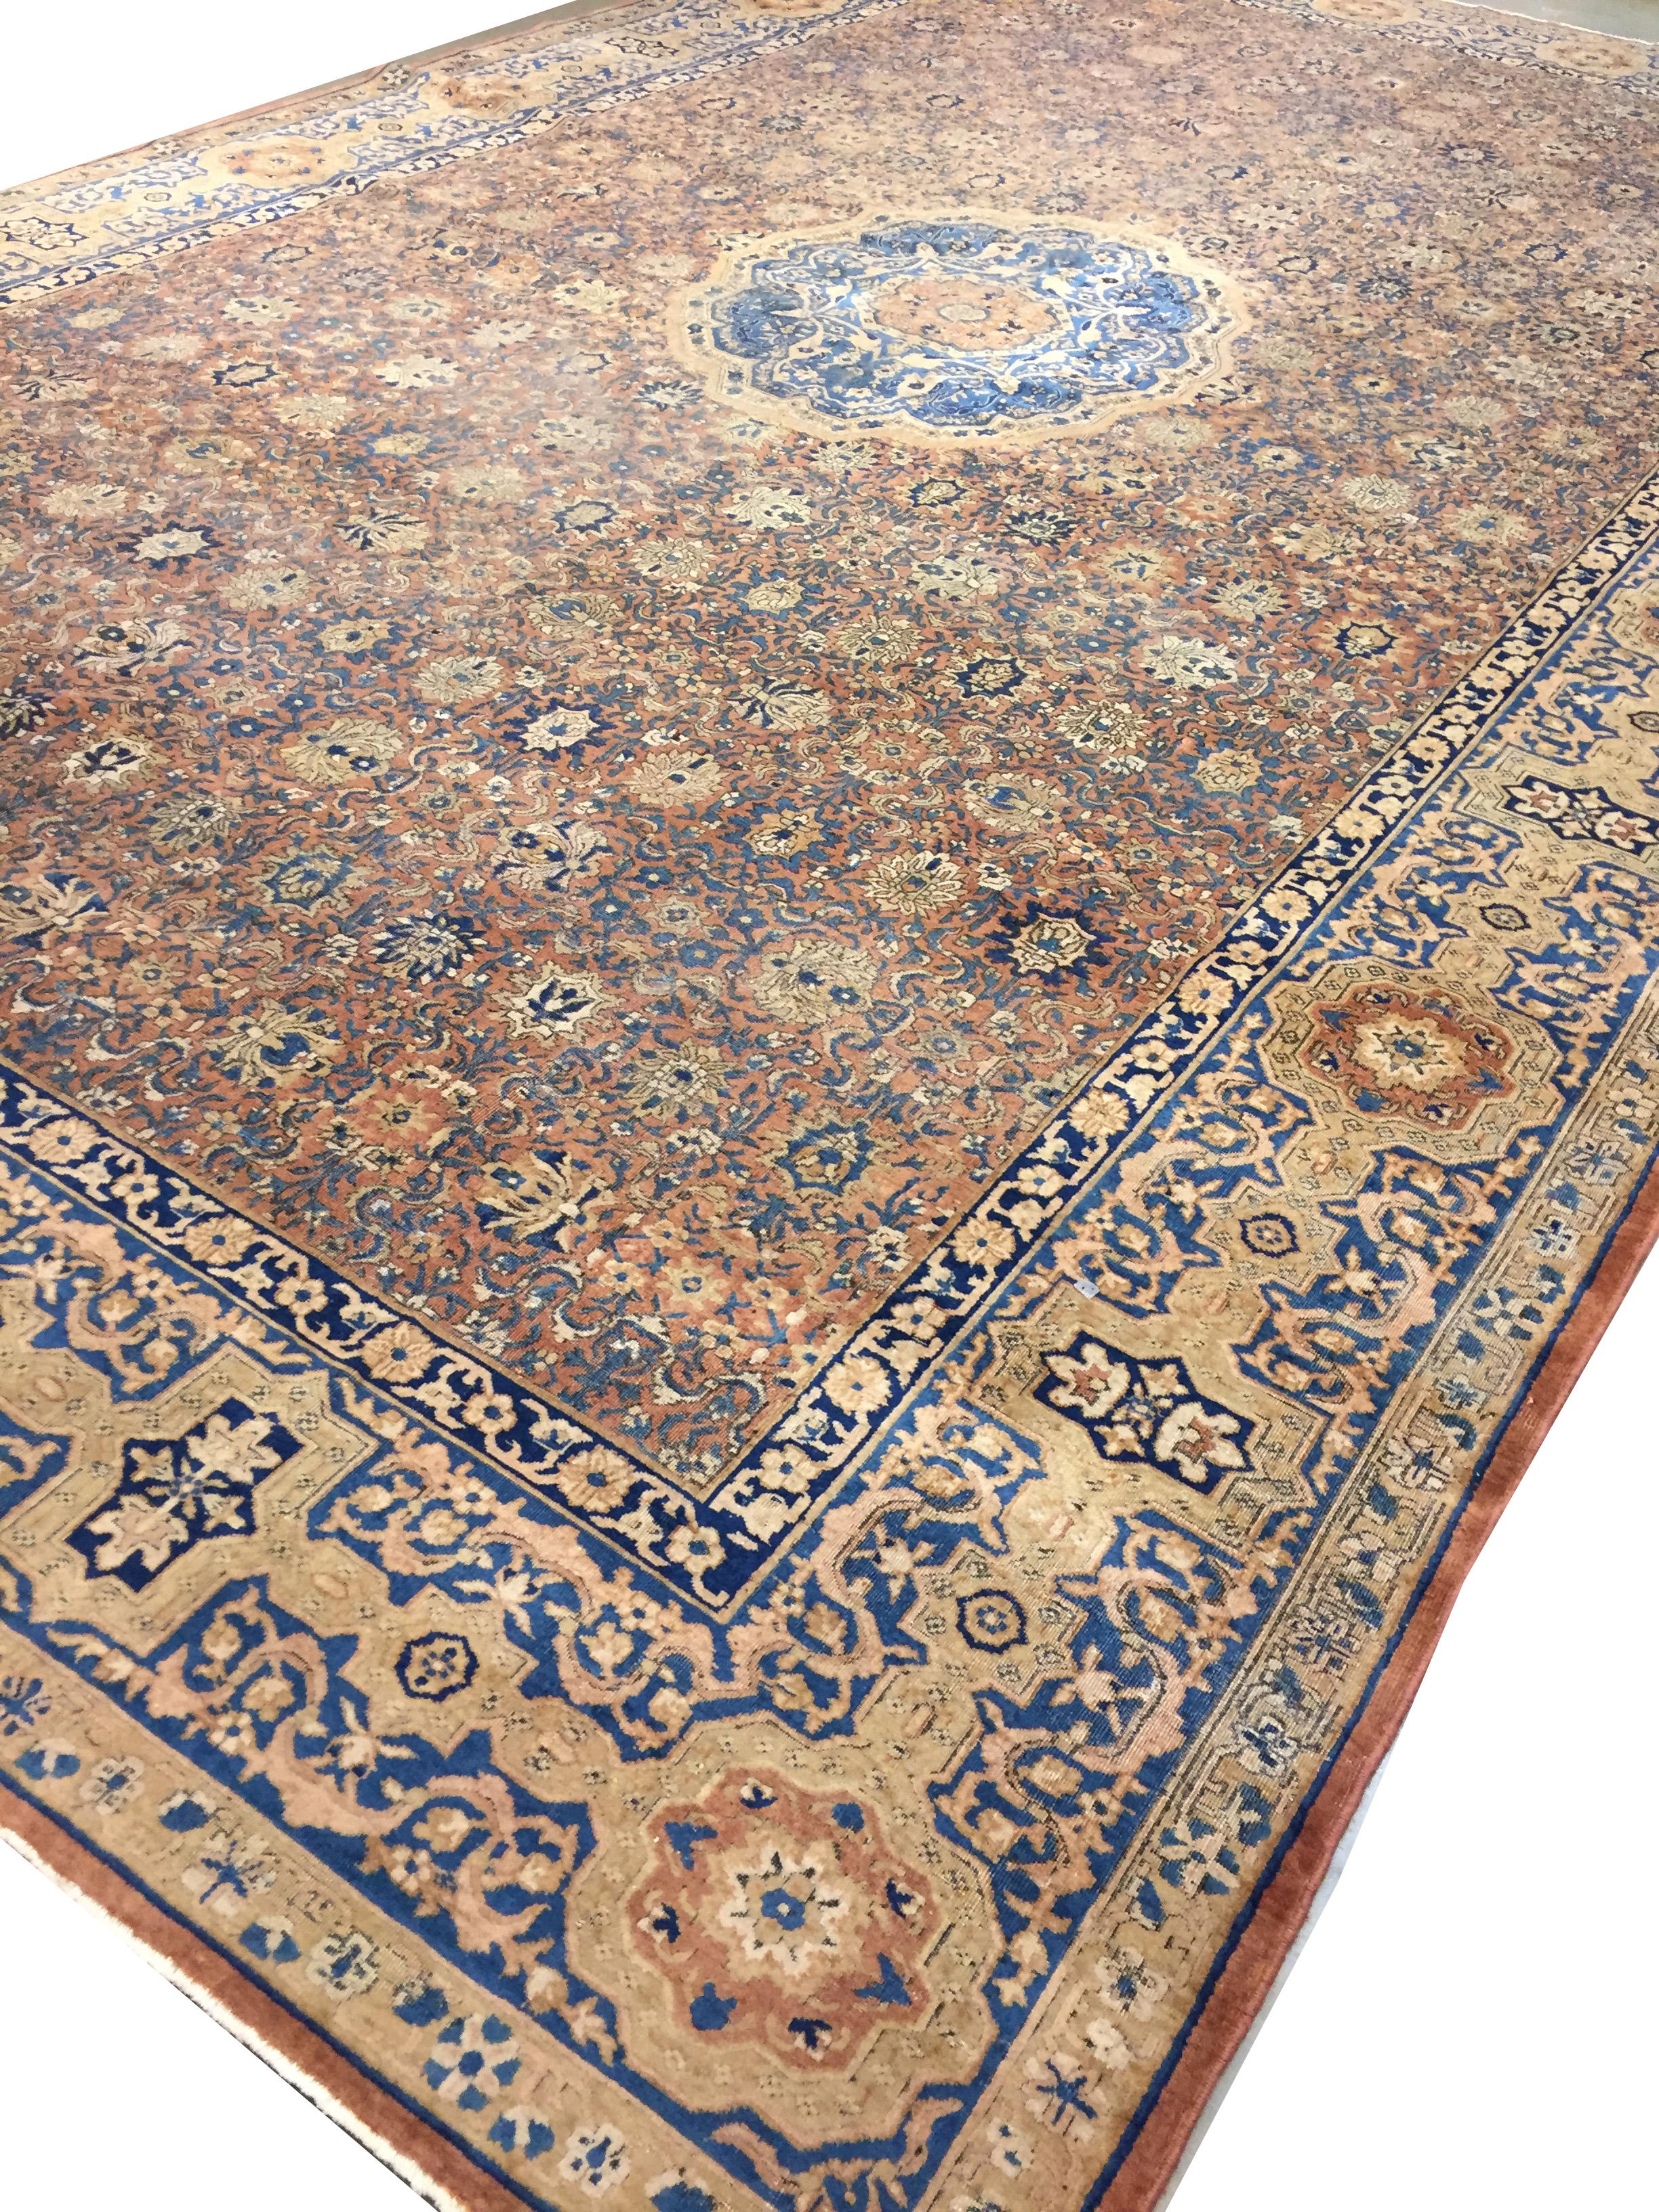 Antique Agra Carpet, circa 1890  10'4 x 17' In Good Condition For Sale In New York, NY